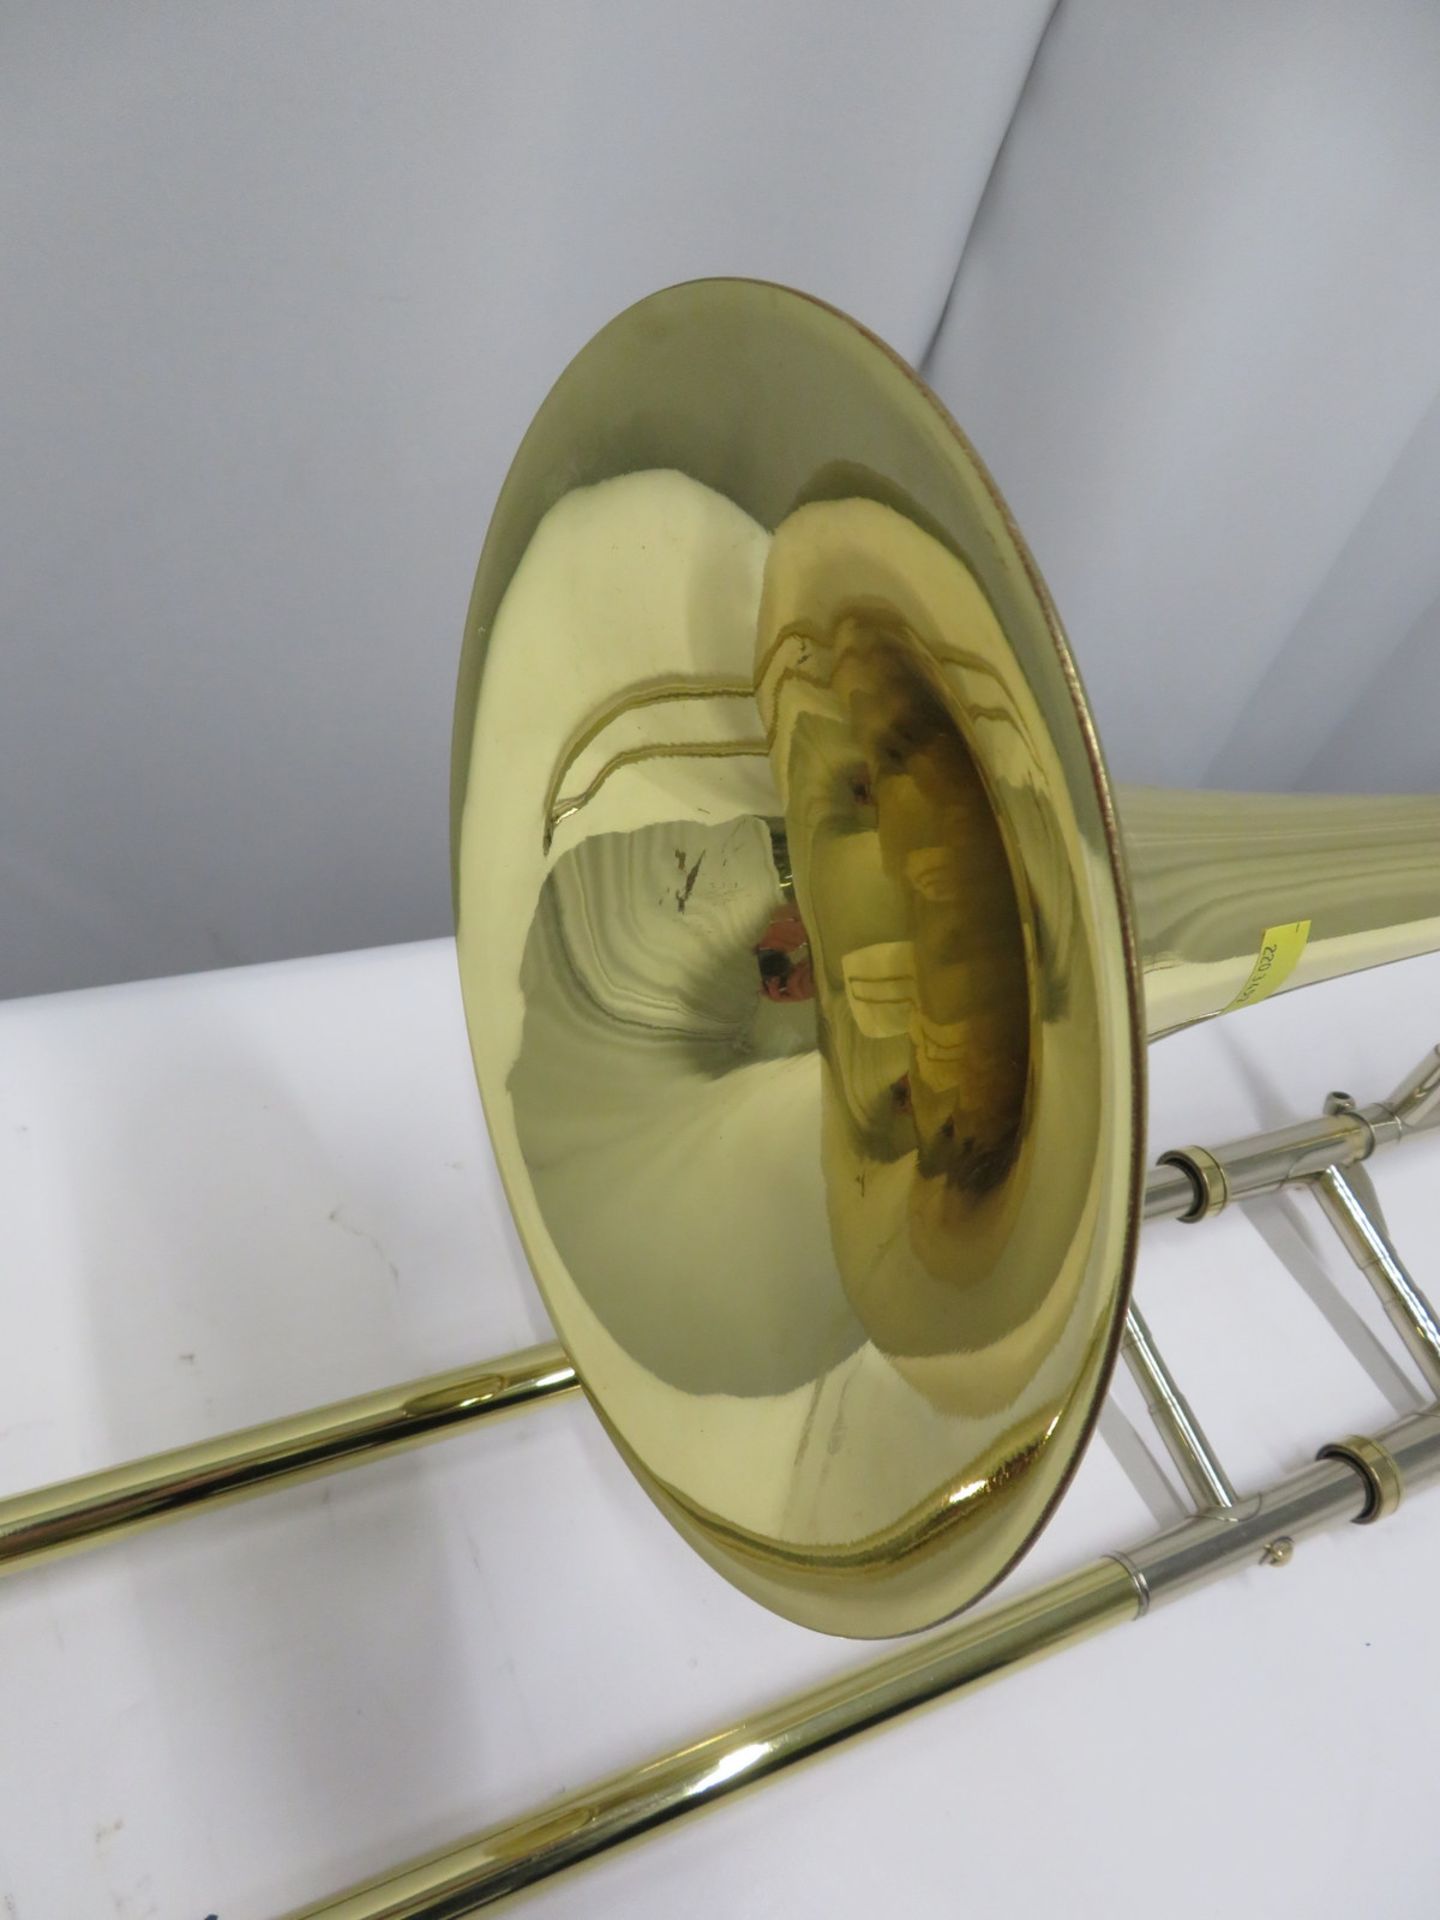 Rath R4 trombone with case. Serial number: R4138. - Image 10 of 15